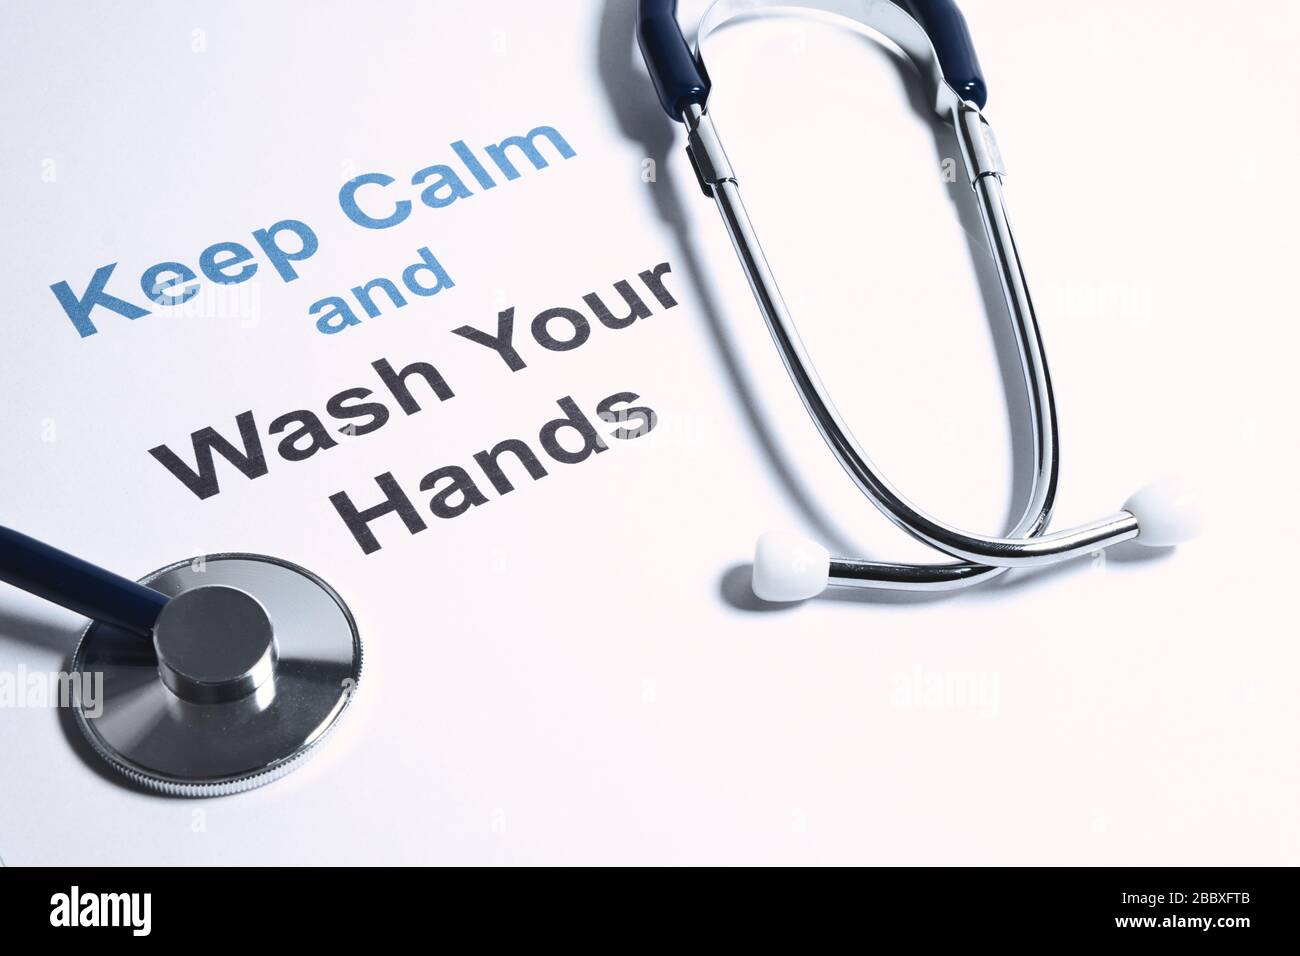 Keep calm and wash your hands text. Concept idea of quarantine or social isolation advice for novel coronavirus or COVID-19 pandemic Stock Photo